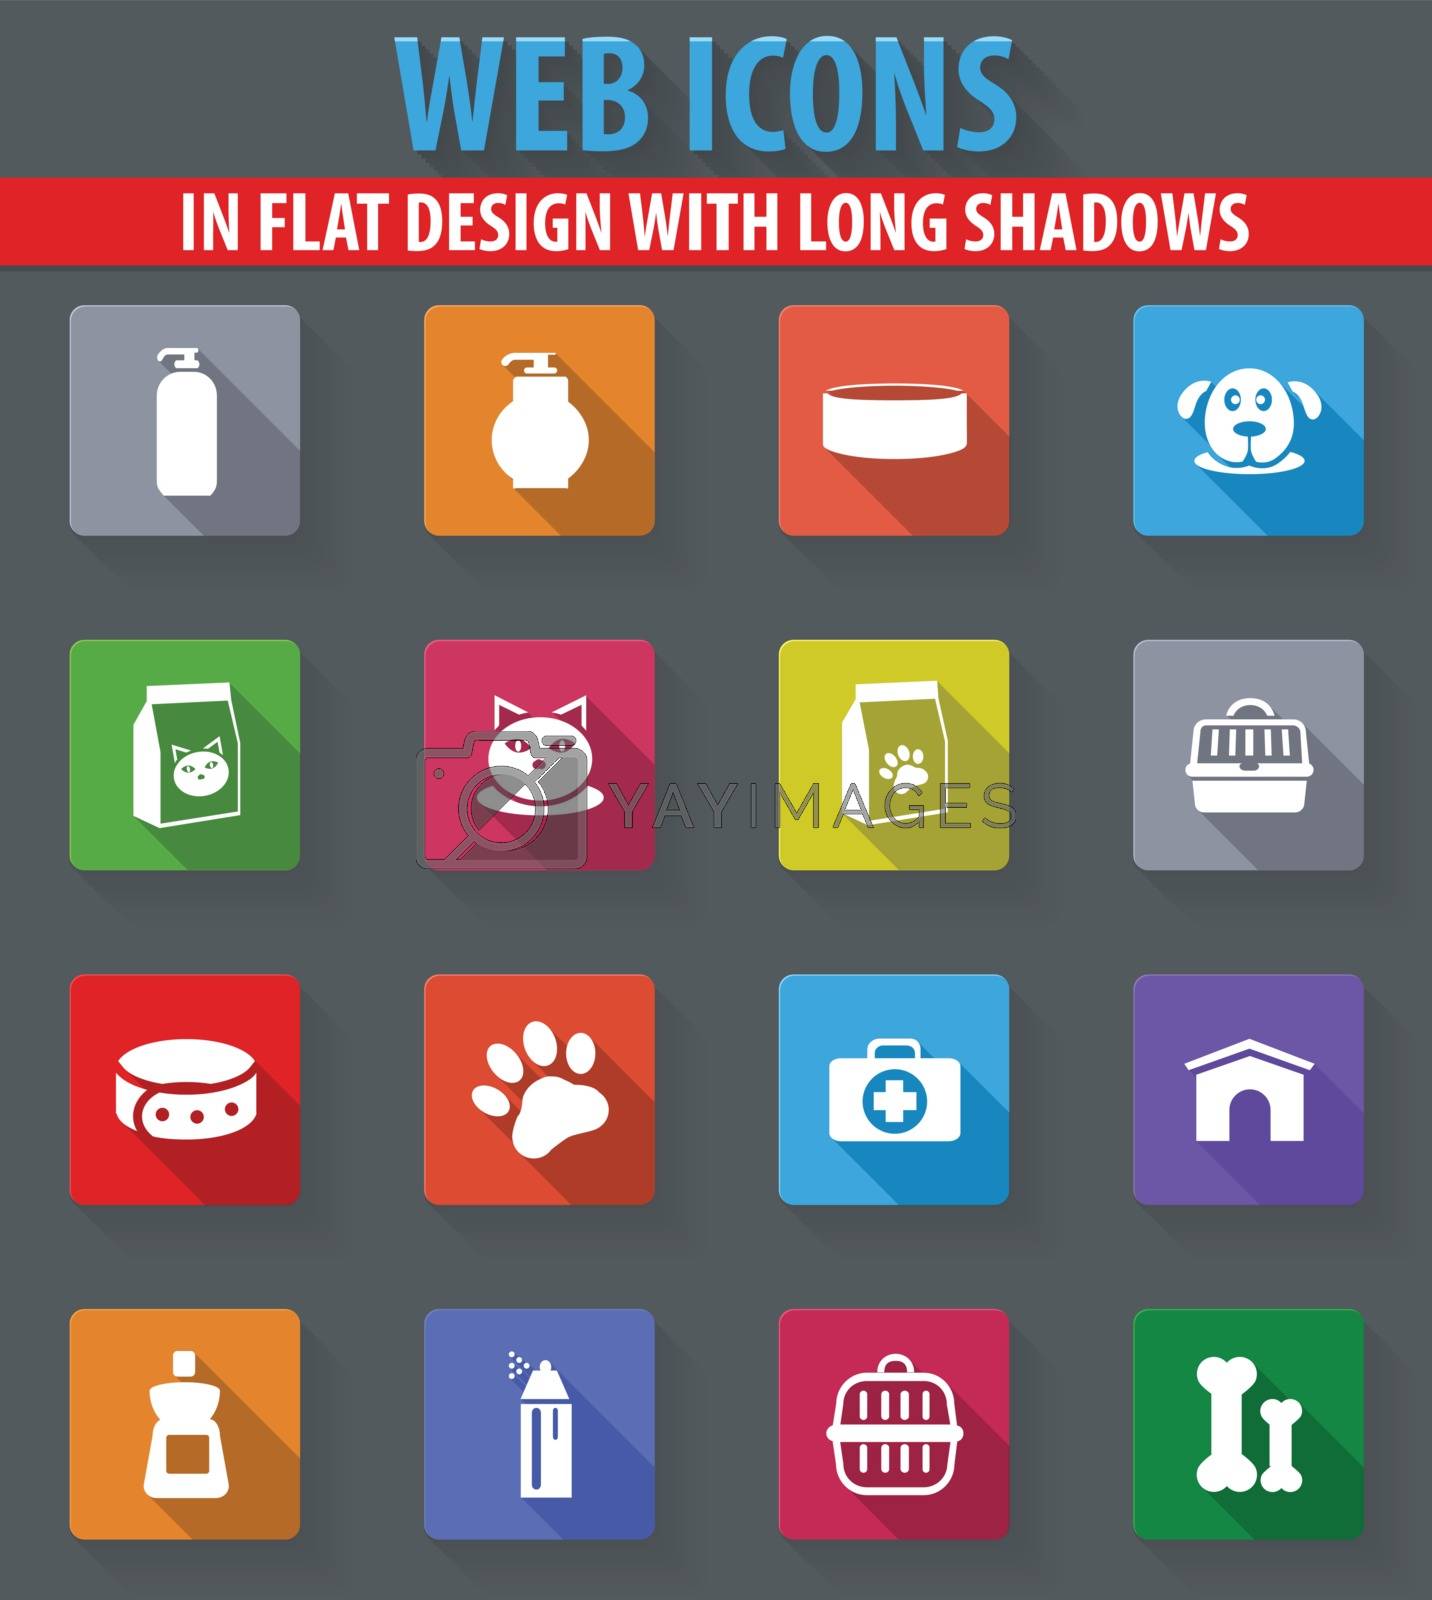 Goods for pets web icons in flat design with long shadows